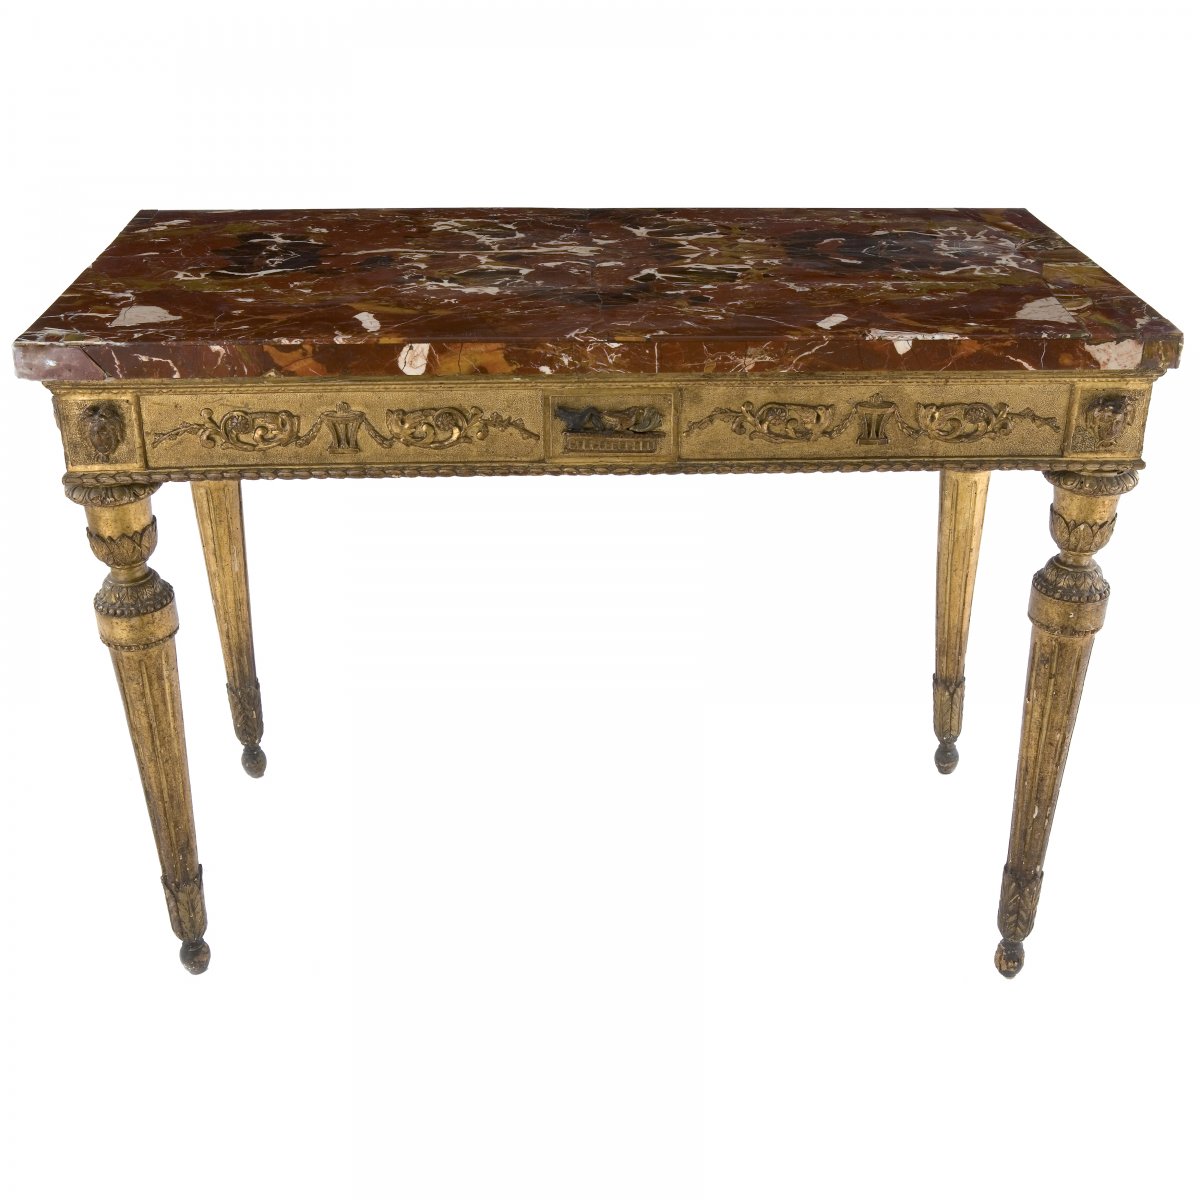 Italian Console Table Neoclassical Late Eighteenth Century